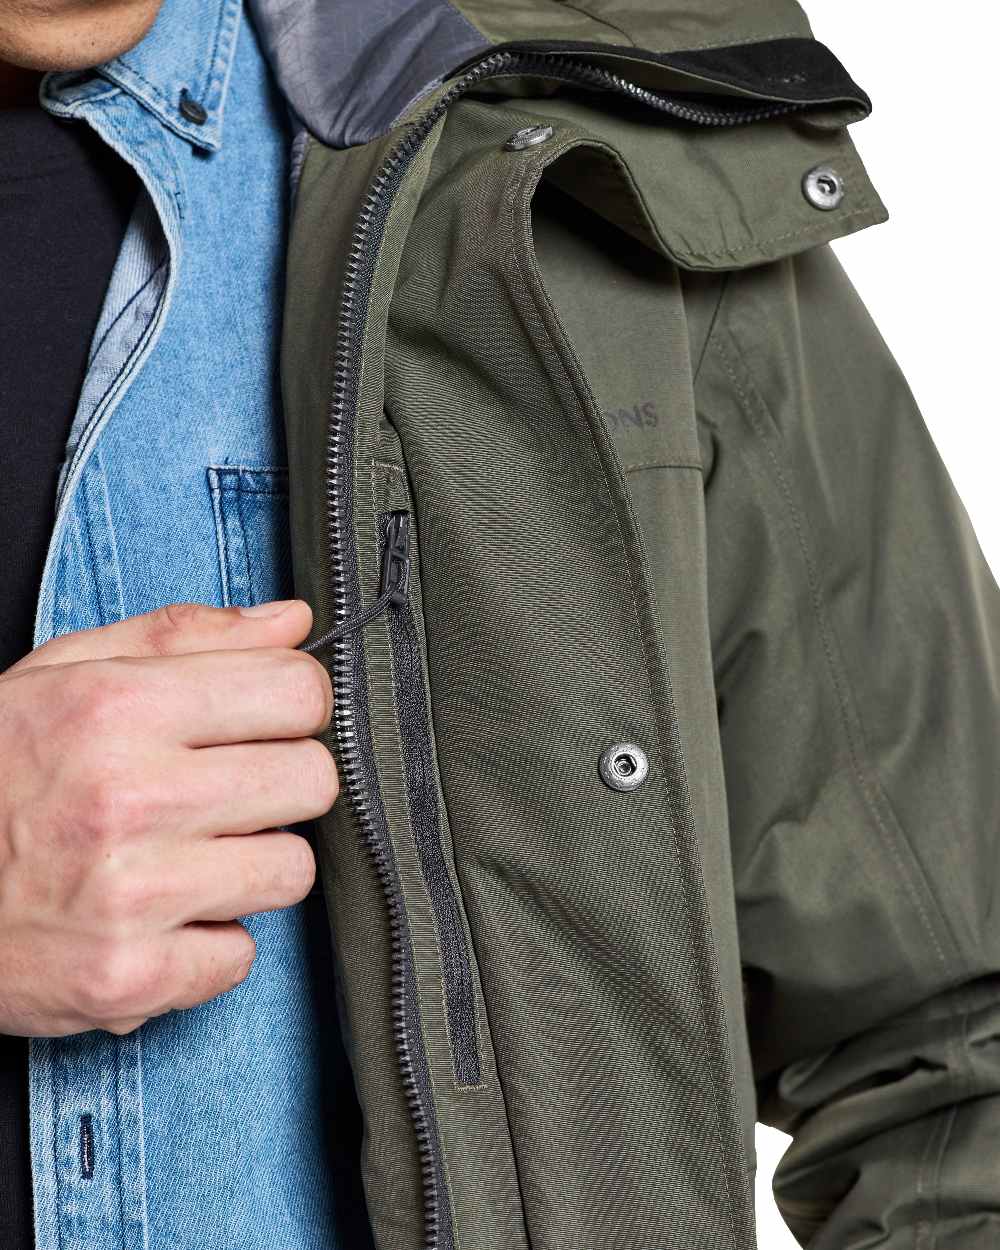 Didriksons Marco Parka 3 in Deep Green 